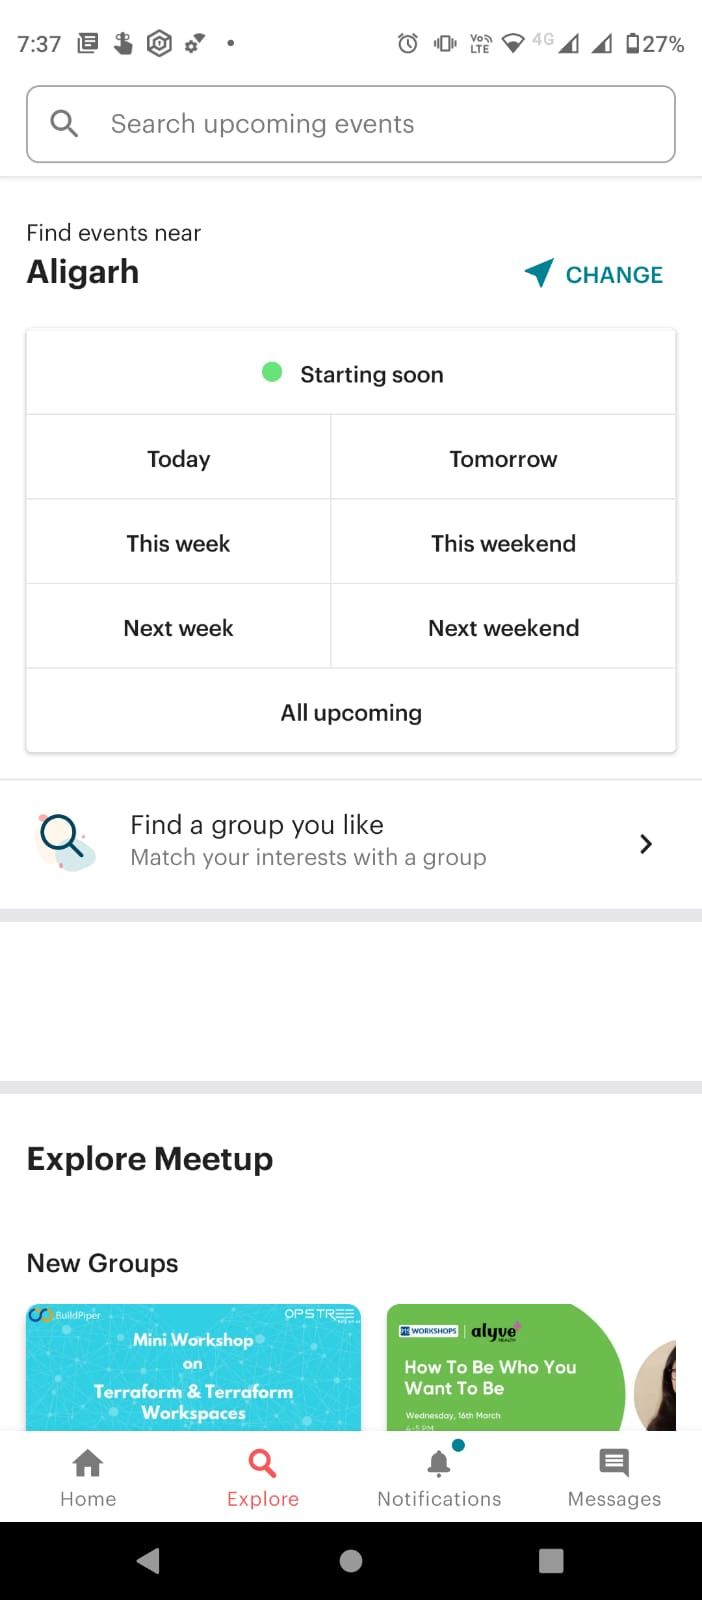 Upcoming events on meet up app